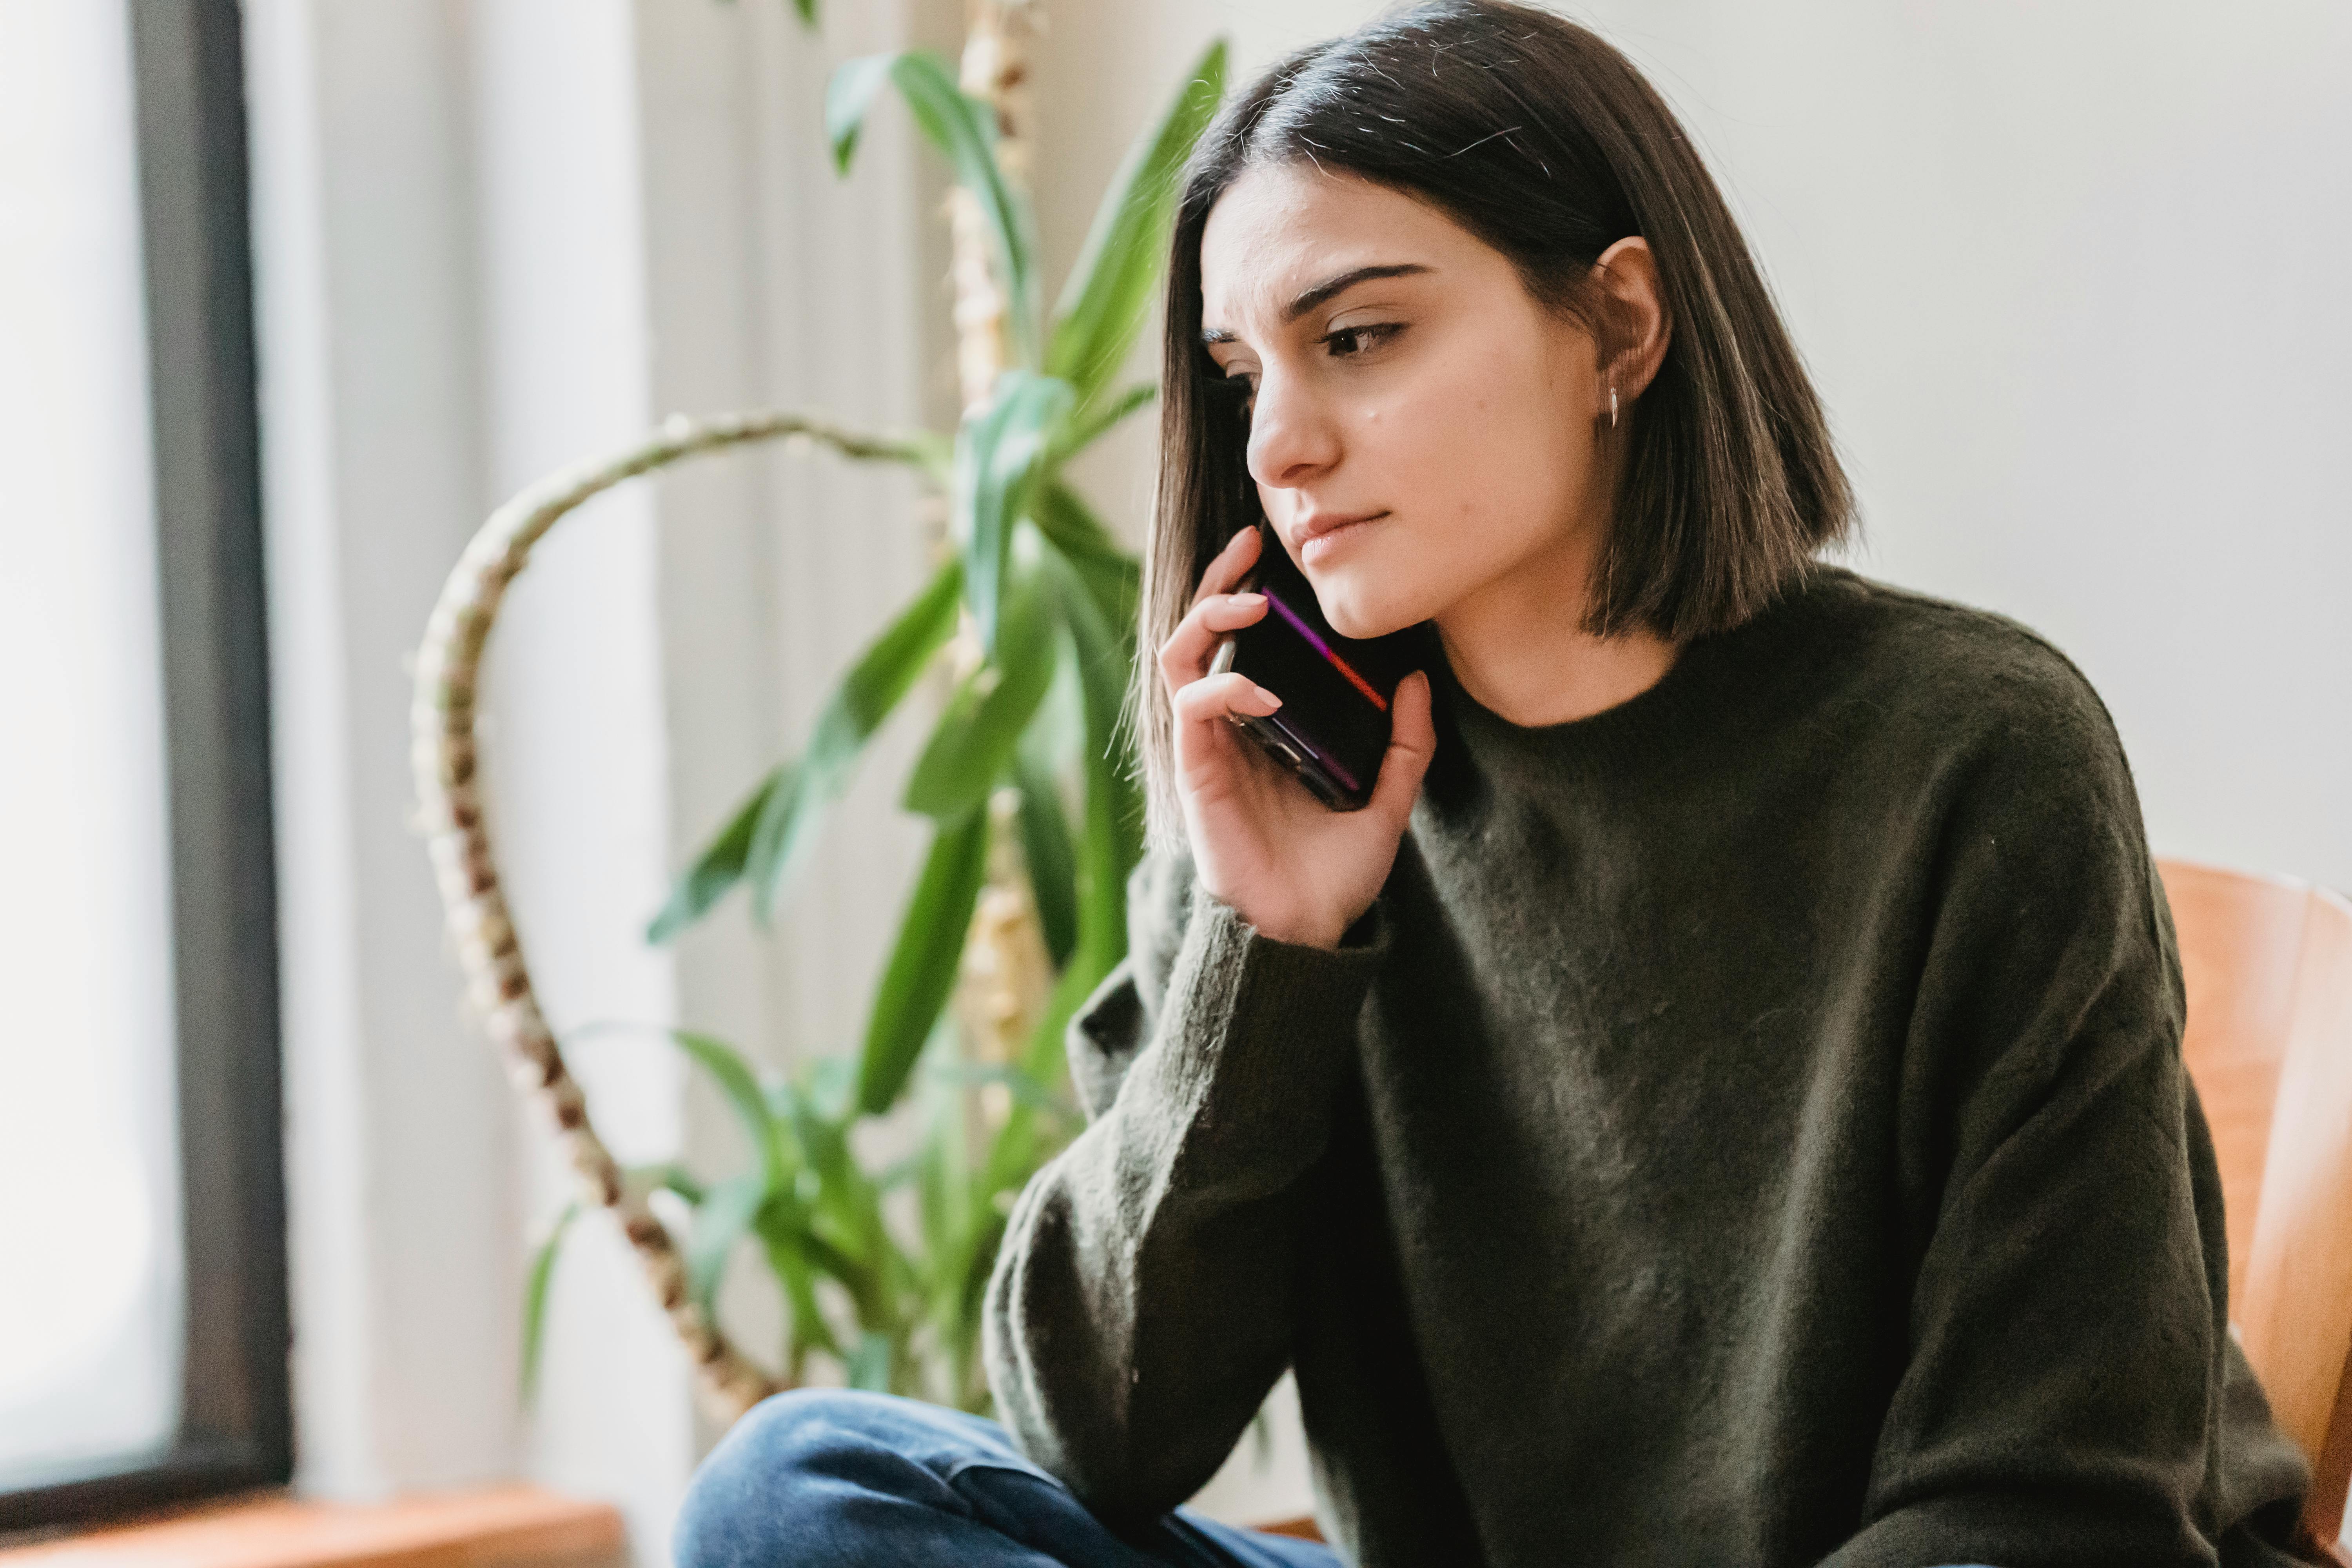 A stern-looking woman on her phone | Source: Pexels